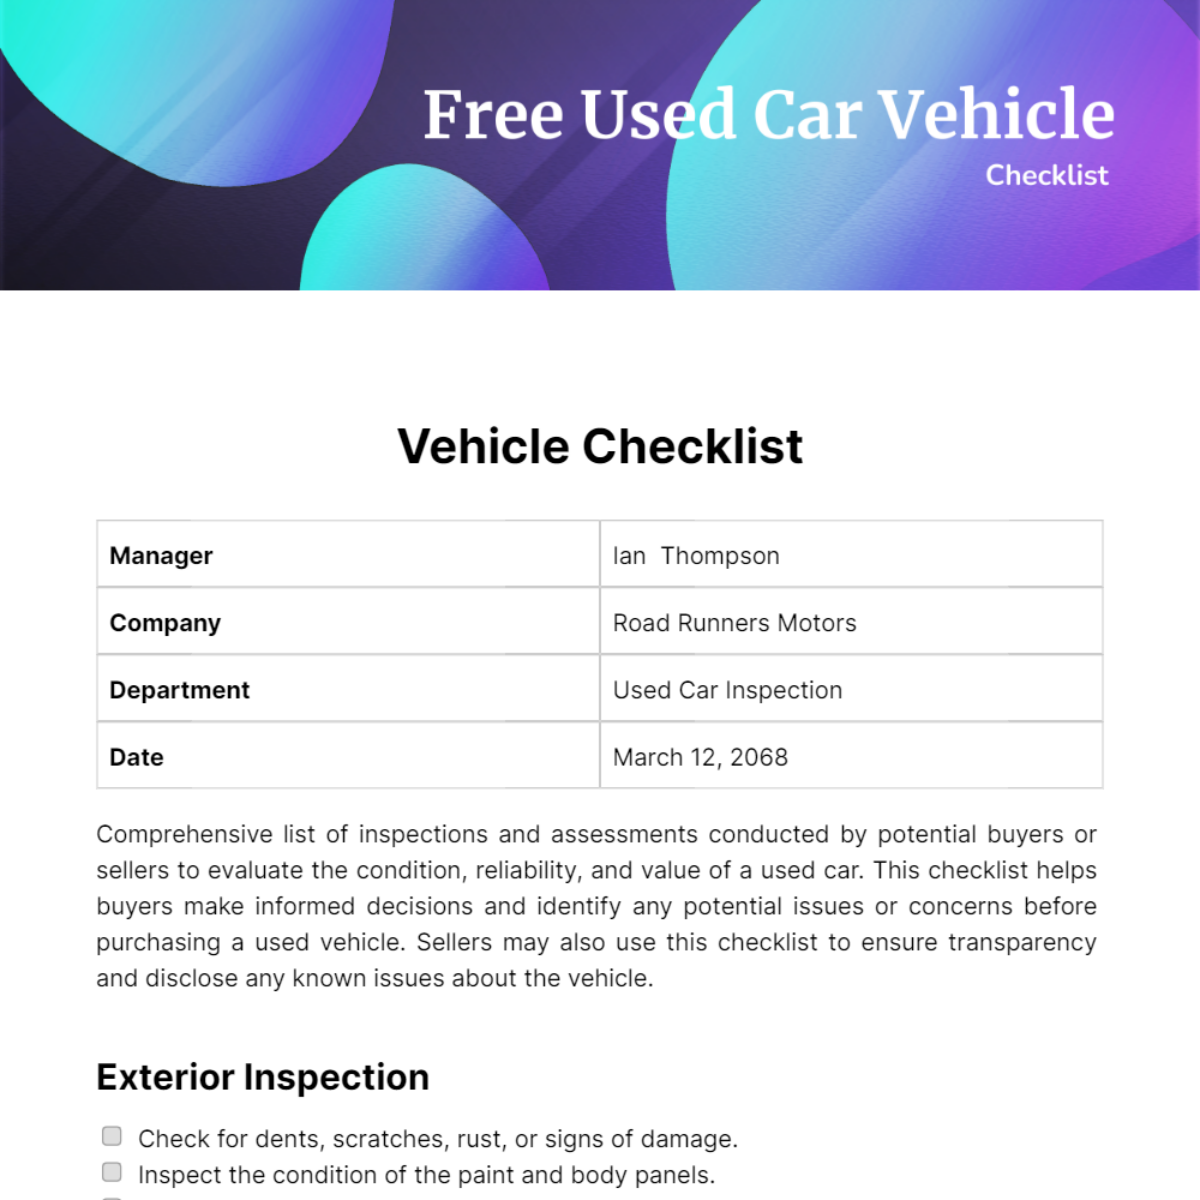 Used Car Vehicle Checklist Template